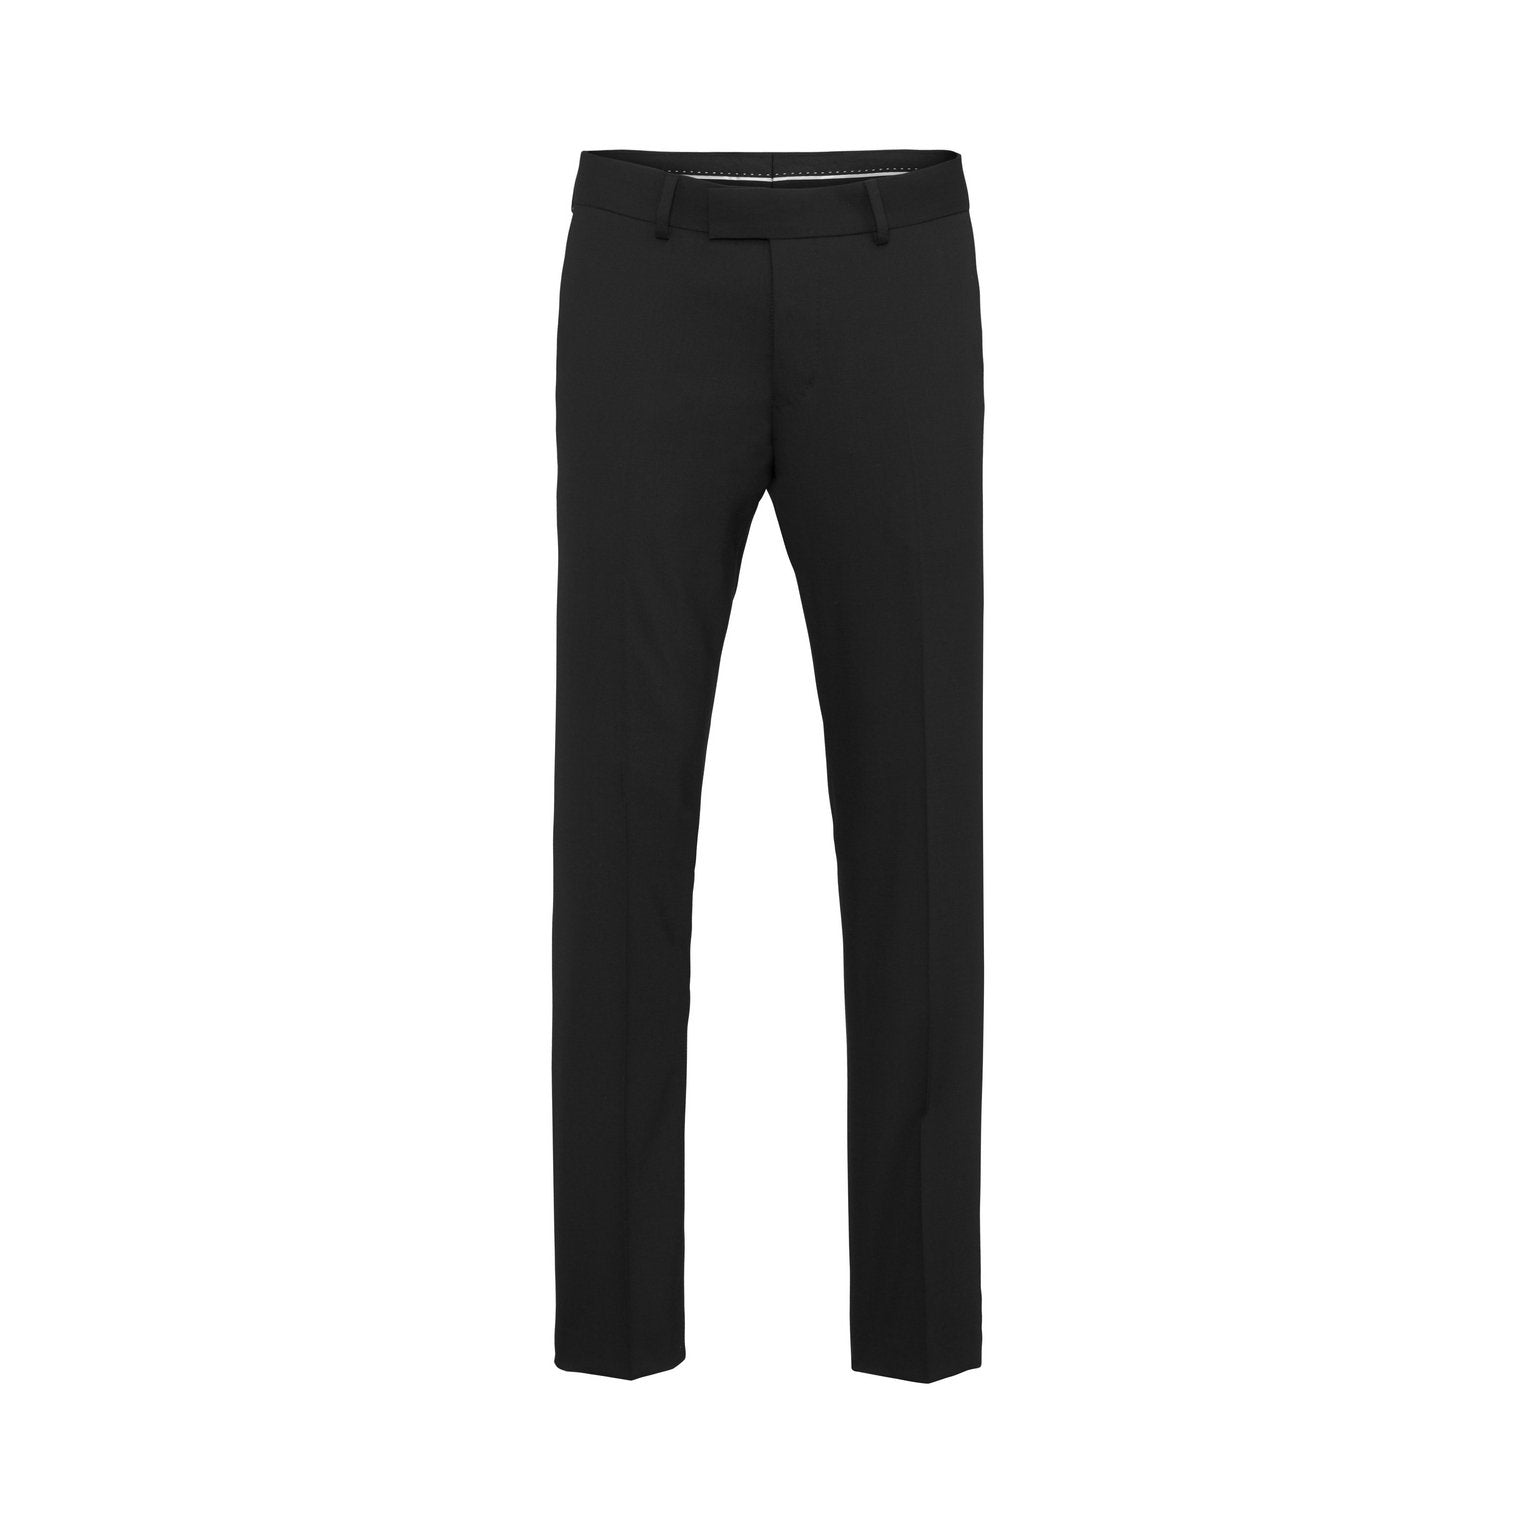 Tiger Of Sweden Gordon Suit Trousers, Black 050 - Mojo Independent Store